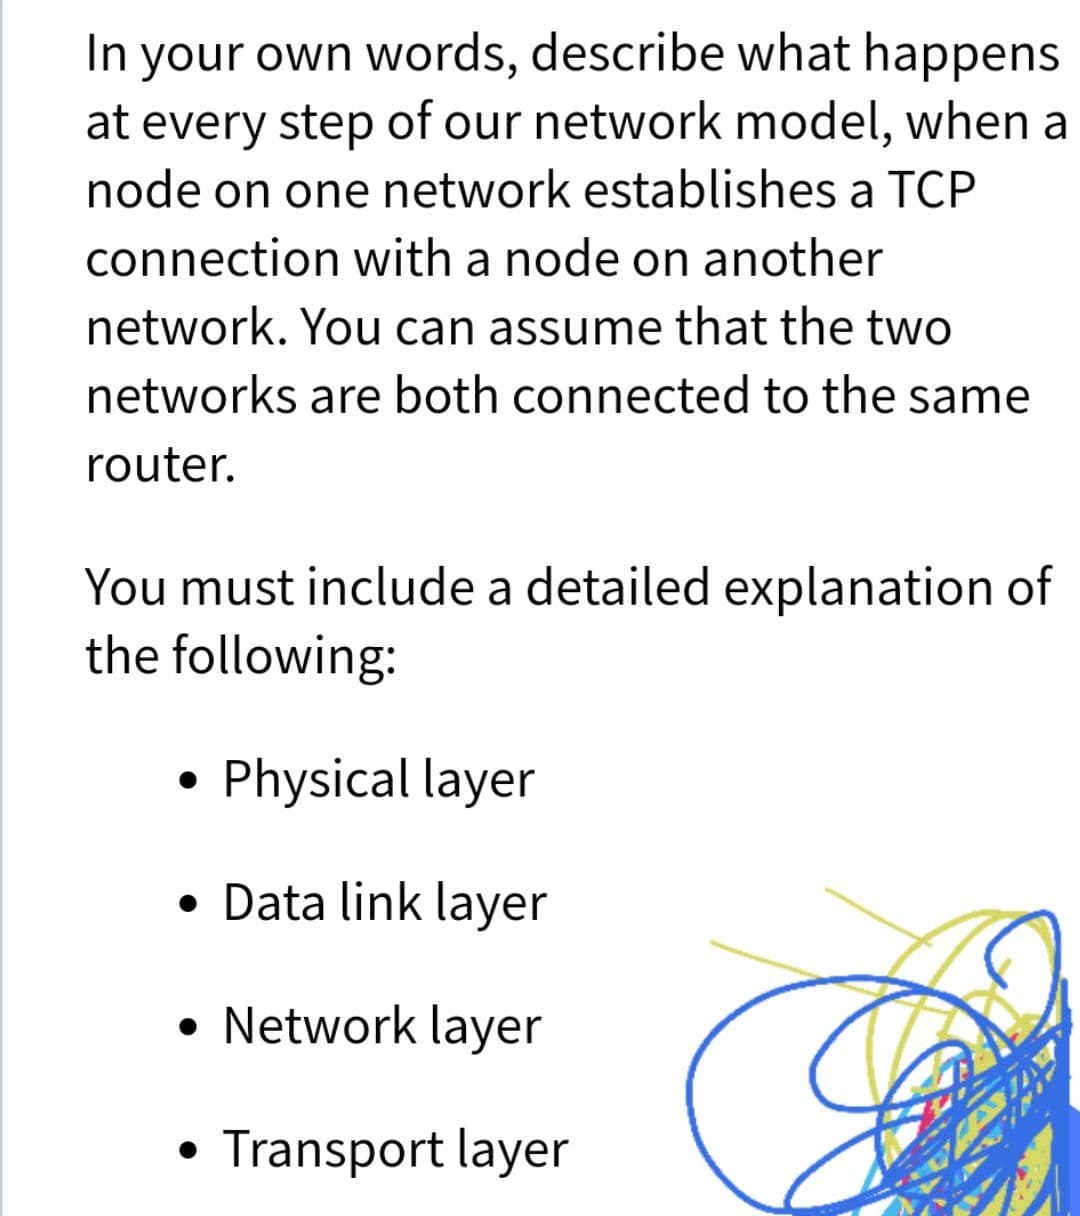 In your own words, describe what happens
at every step of our network model, when a
node on one network establishes a TCP
connection with a node on another
network. You can assume that the two
networks are both connected to the same
router.
You must include a detailed explanation of
the following:
Physical layer
• Data link layer
• Network layer
Transport layer